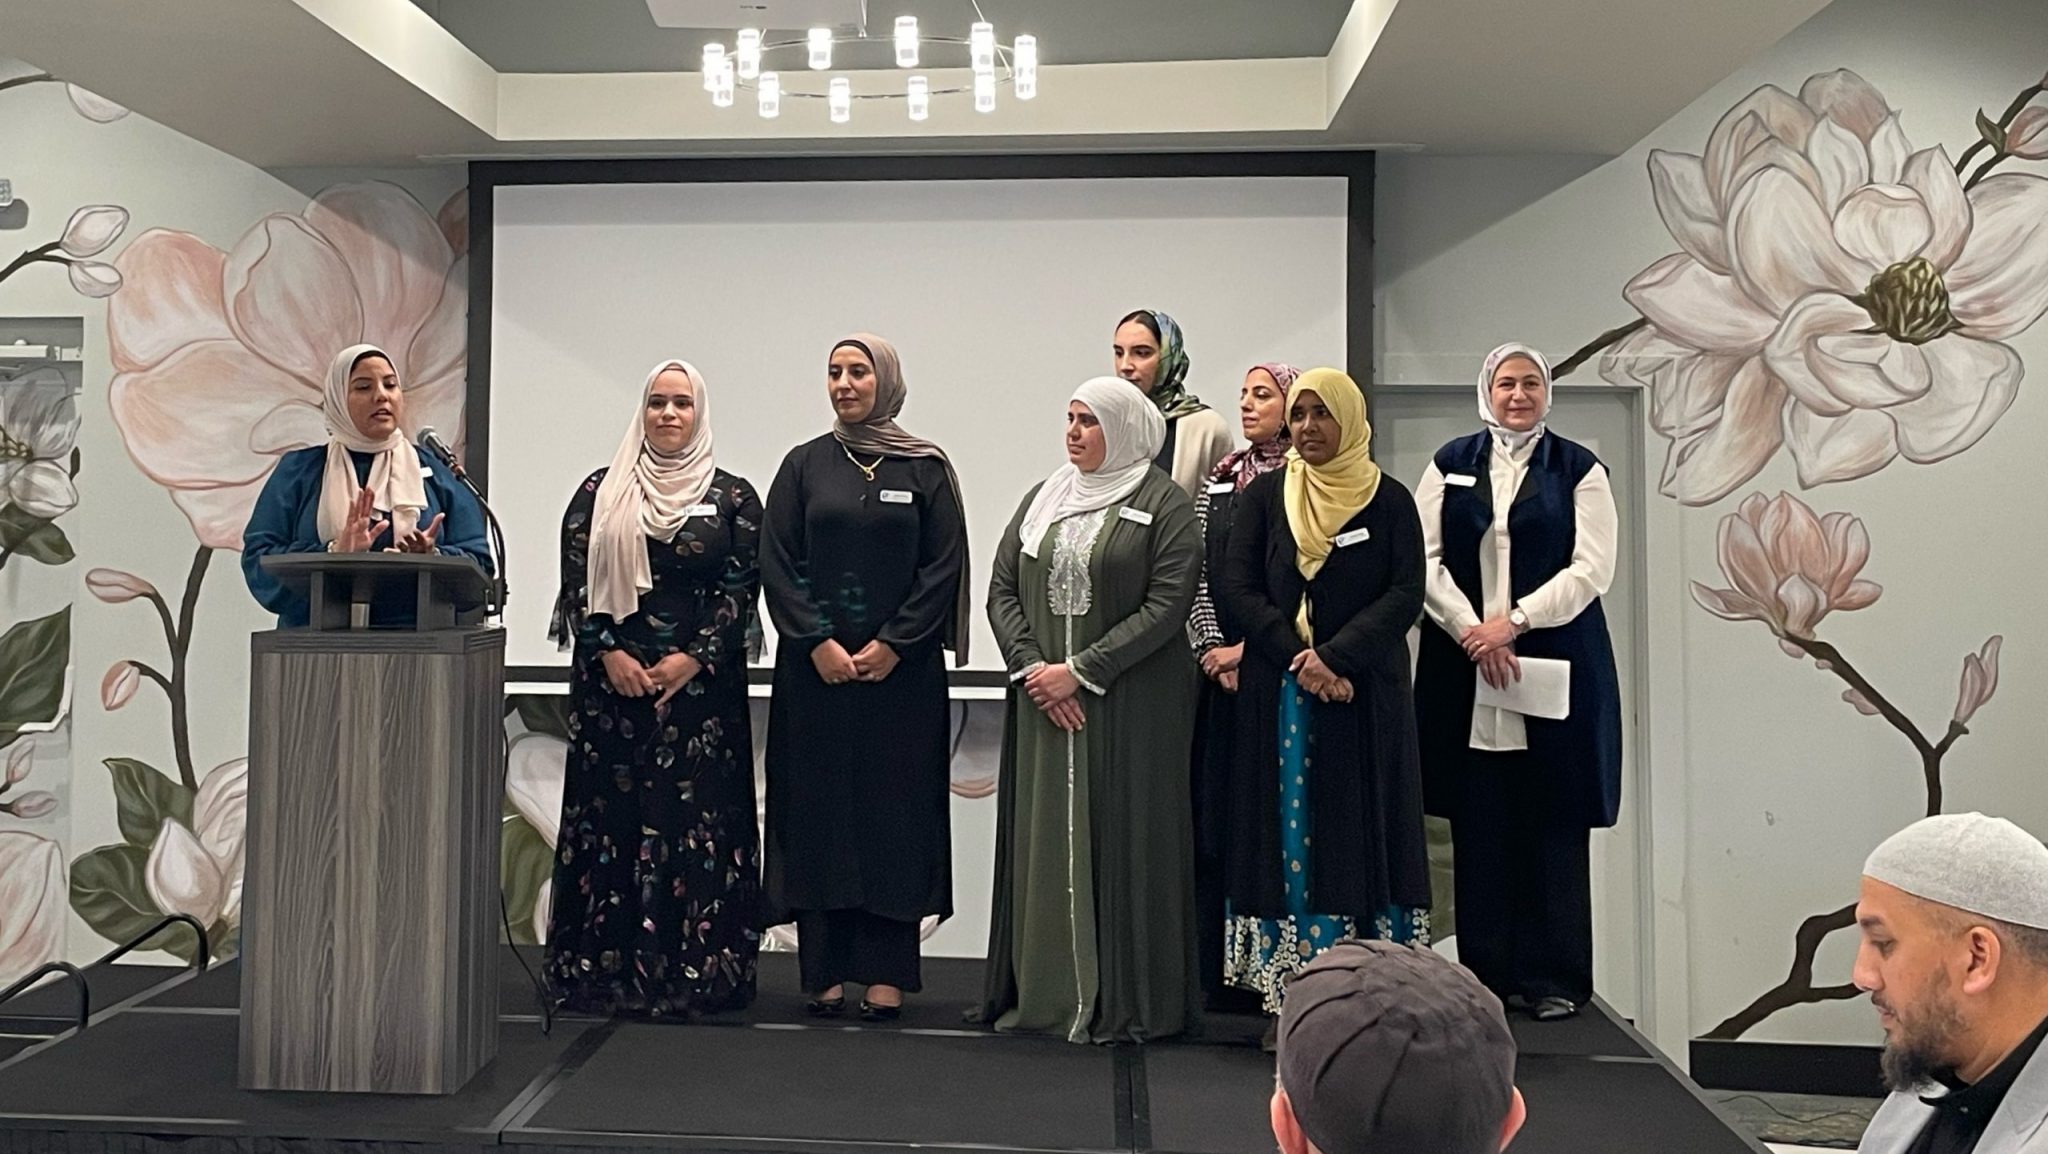 The Muslim Foster Care Association held a fundraising banquet in November to raise awareness about the shortage of Muslim foster parents.